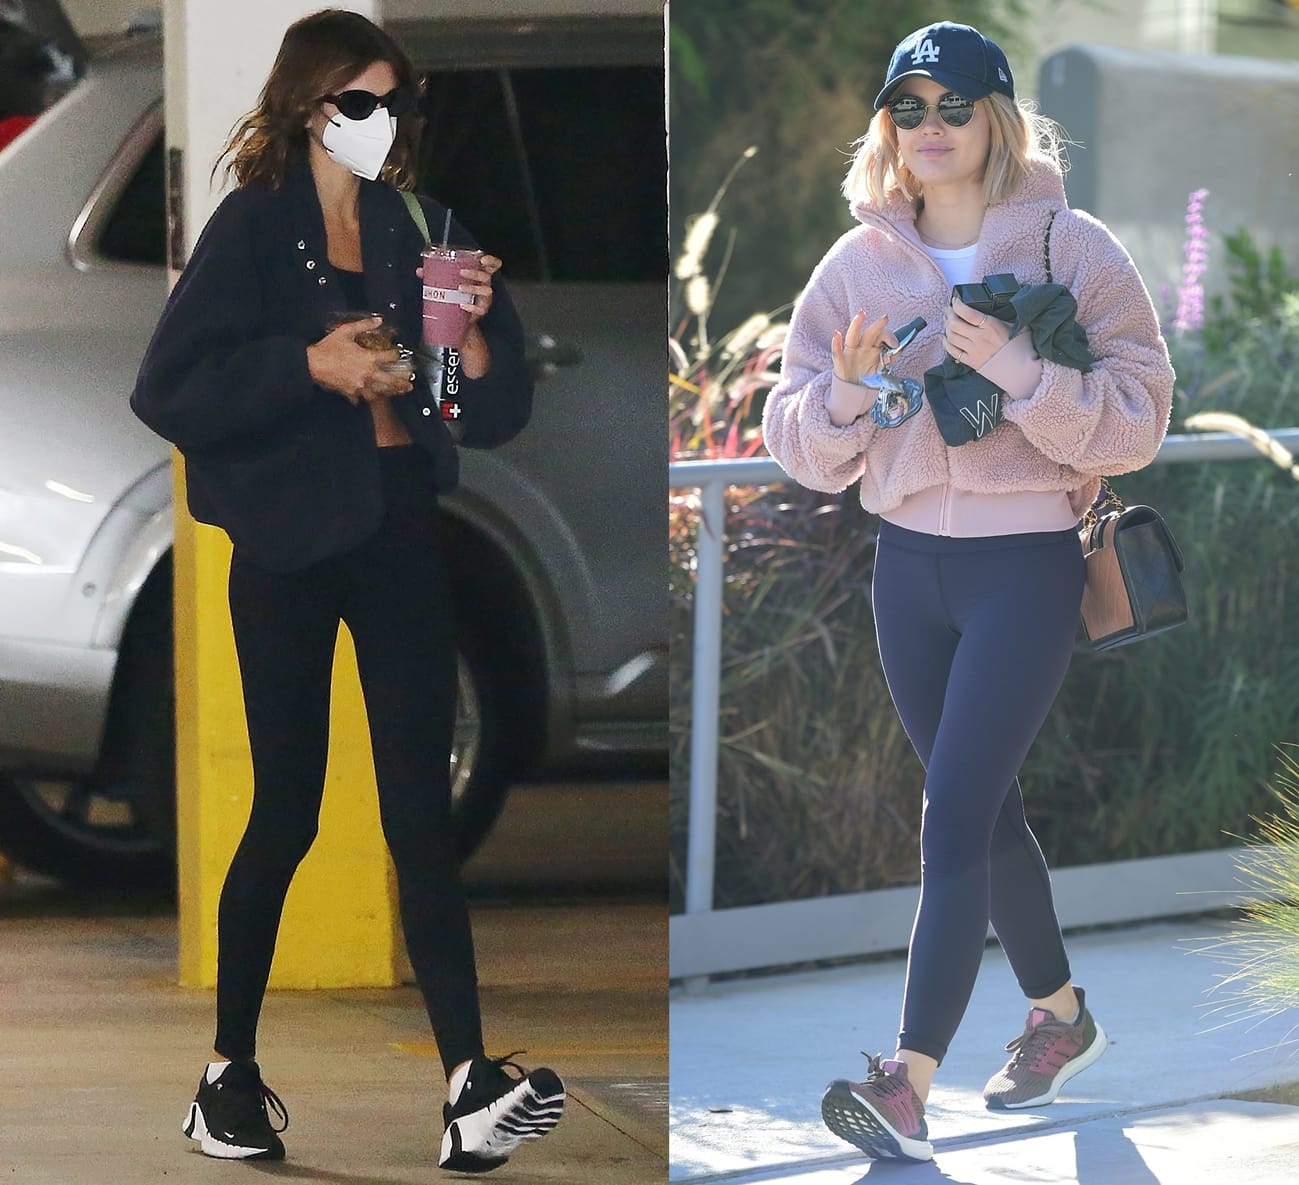 Kaia Gerber (L) and Lucy Hale show two great ways to style fleece jackets with leggings and sneakers